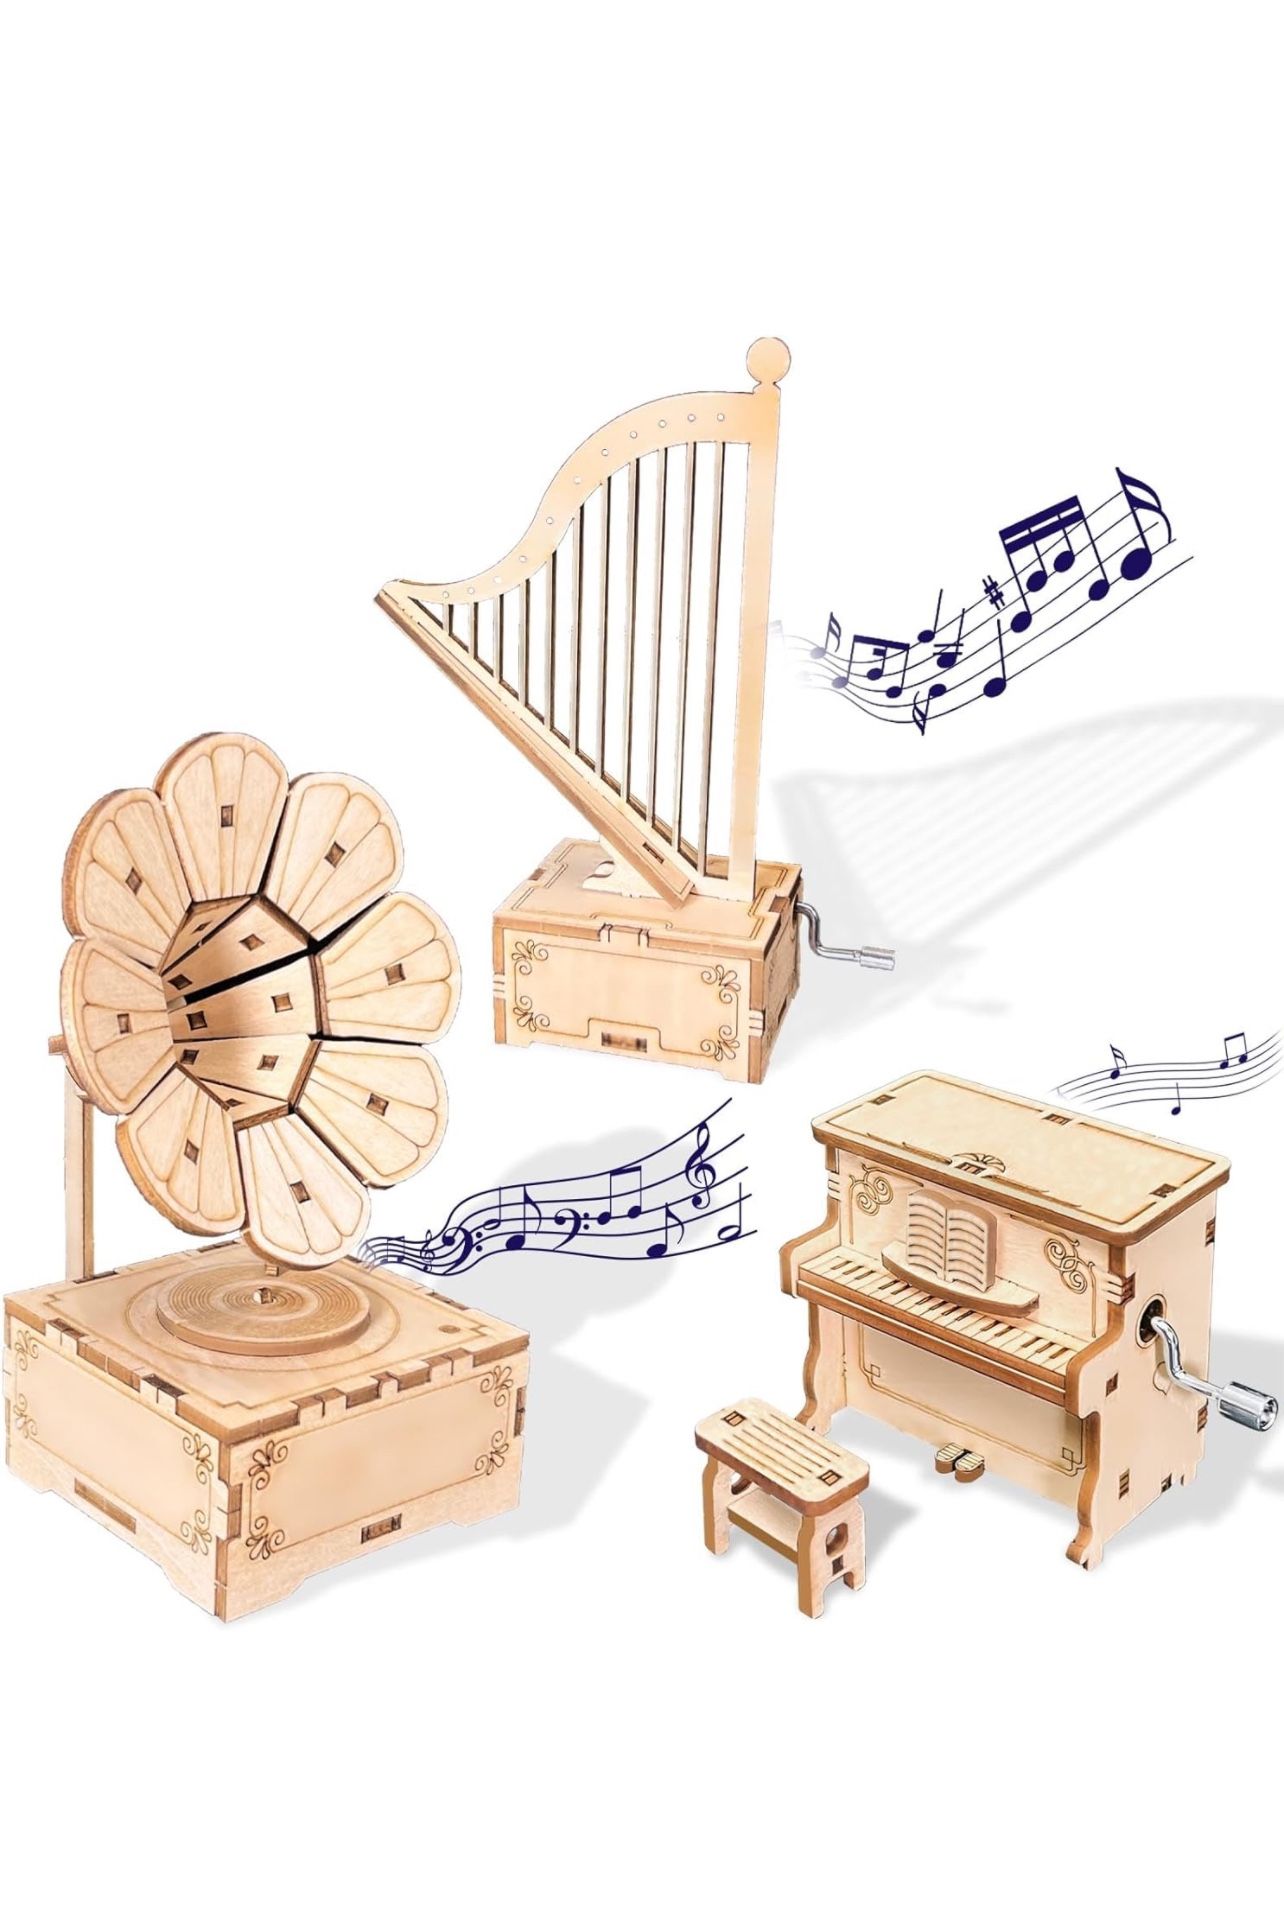 3in1 3D Wooden Puzzle for Adults Music Box Set-Kids DIY Musical